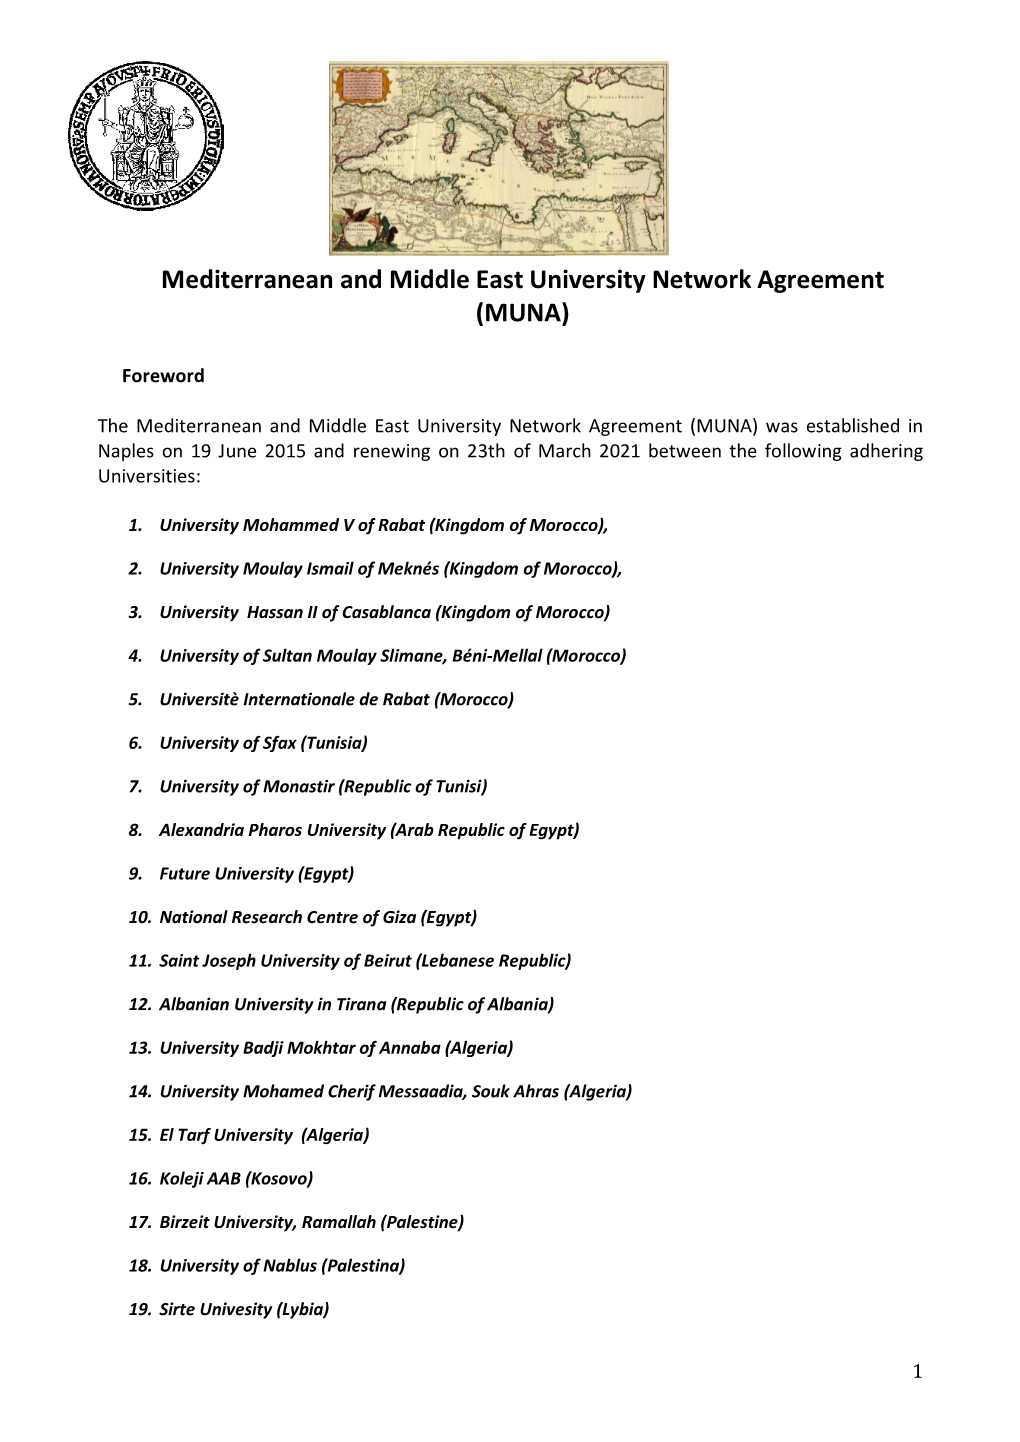 Mediterranean and Middle East University Network Agreement (MUNA)